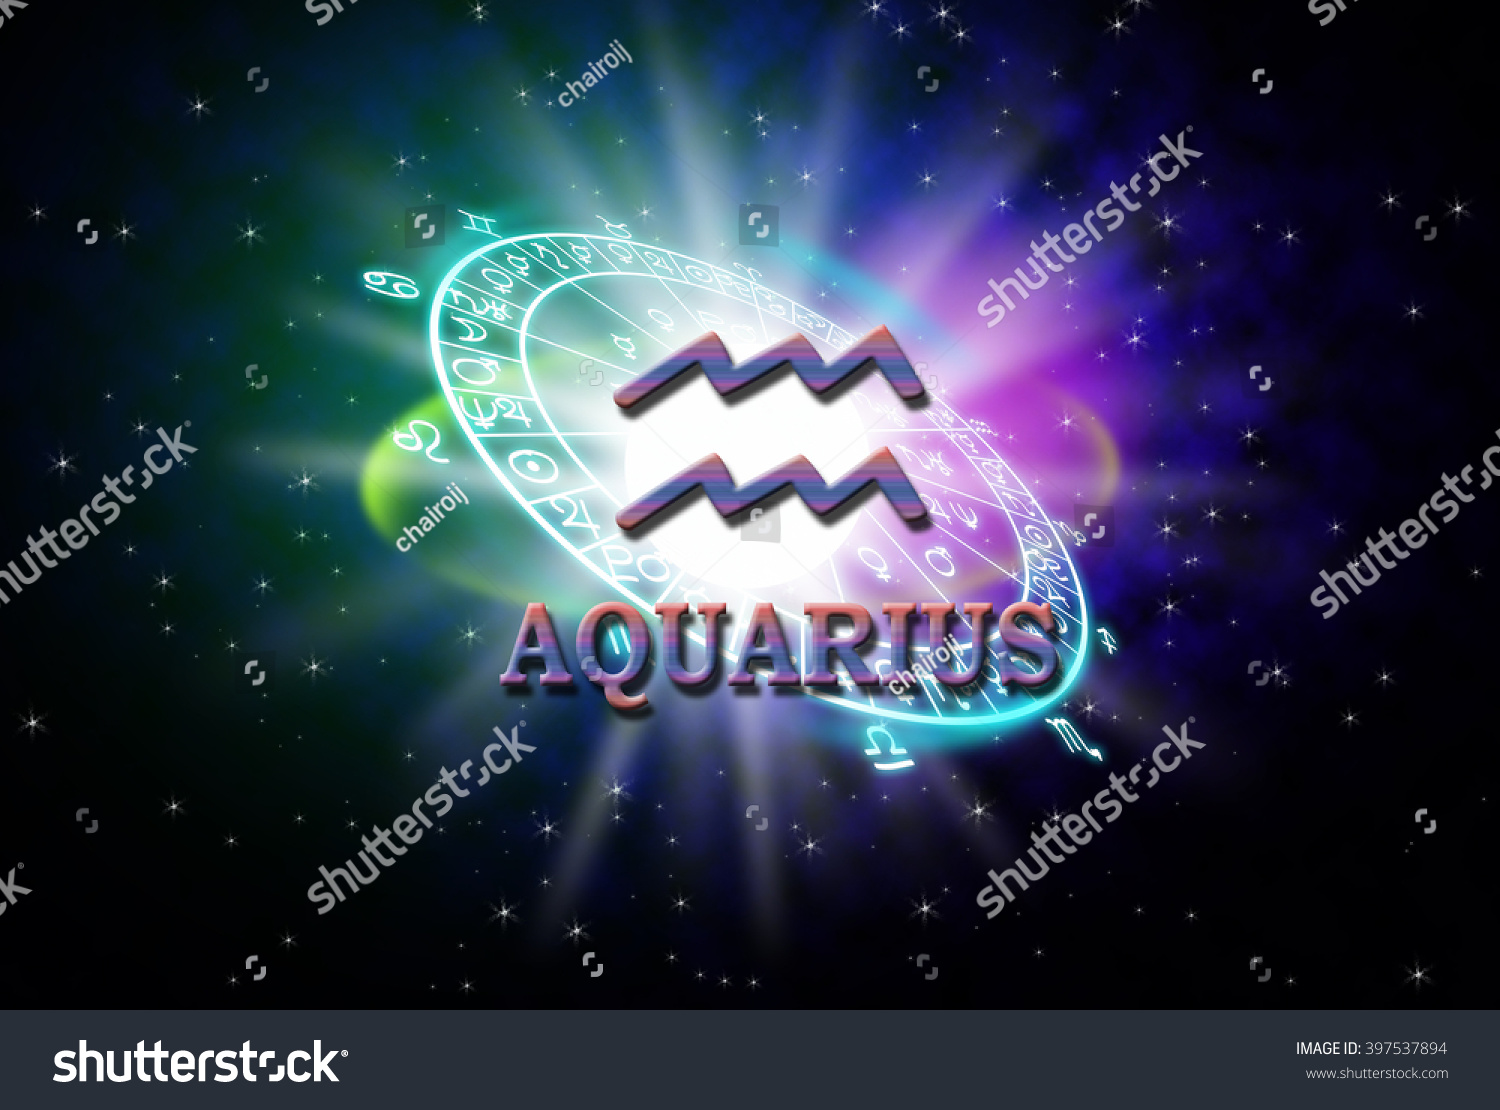 The Zodiac And Astrology Background. Stock Photo 397537894 : Shutterstock